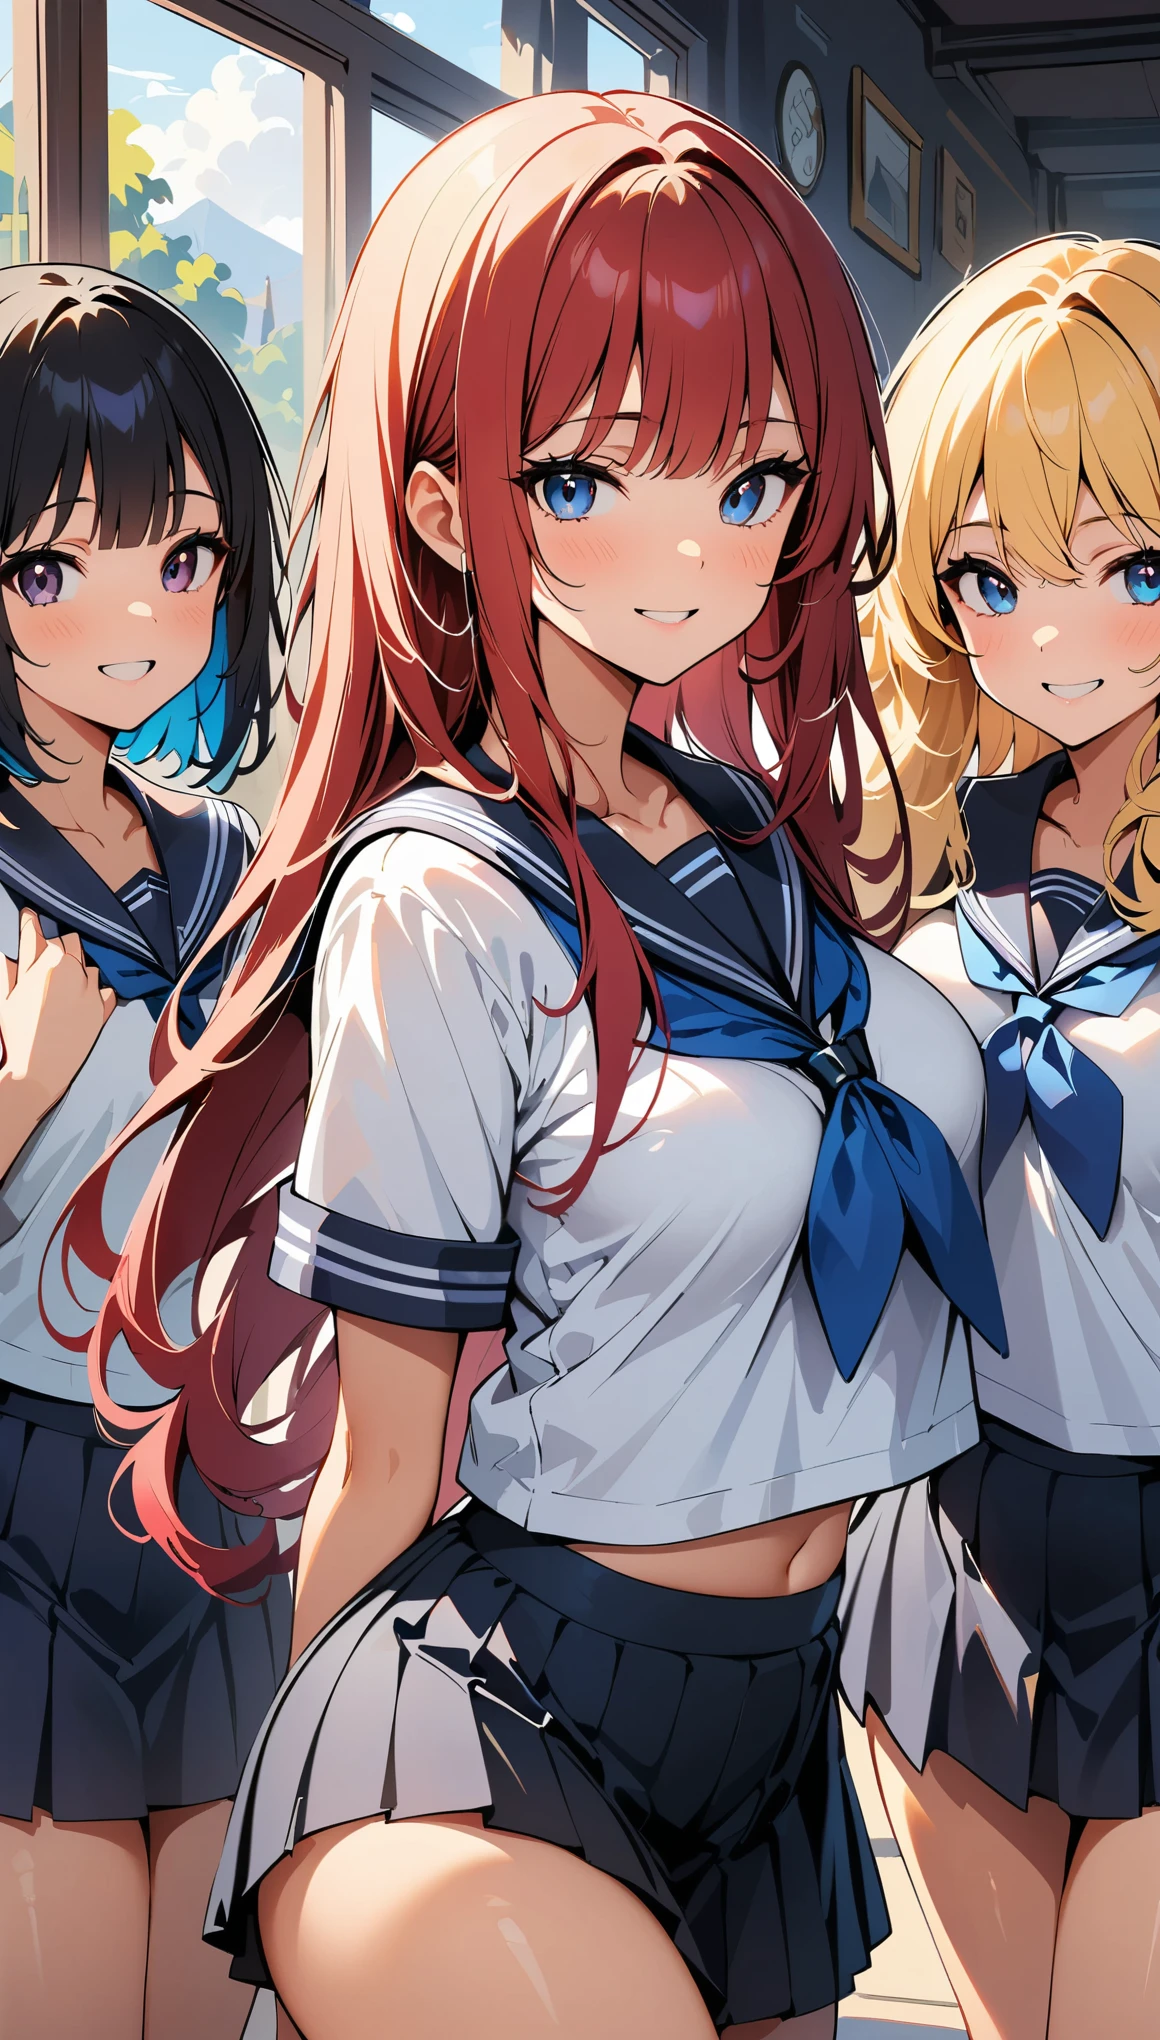 (high quality, 8k, 4K, High Contrast, masterpiece:1.2, 最high quality, Best aesthetics), , ((Four women in sailor suits posing sexy)), Beautiful woman face, Facial details:1.2, Colorful hair colors, The finer details, School Harem, Lots of light coming through the window, happy,